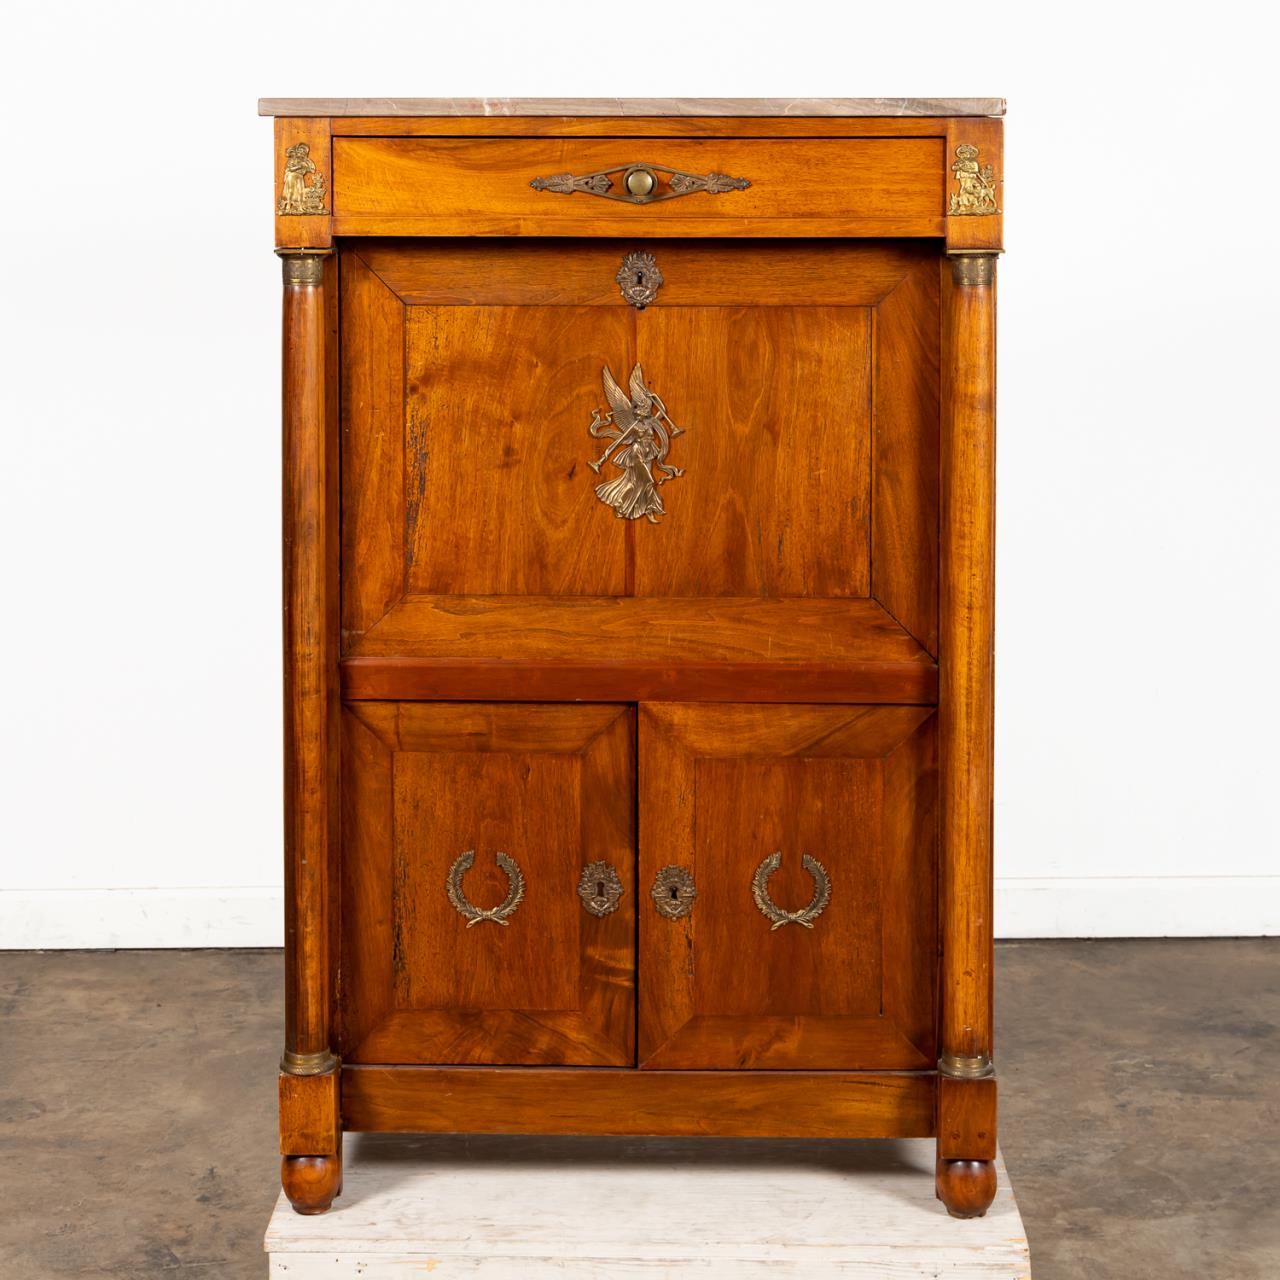 19TH C. FRENCH MARBLE TOP SECRETAIRE